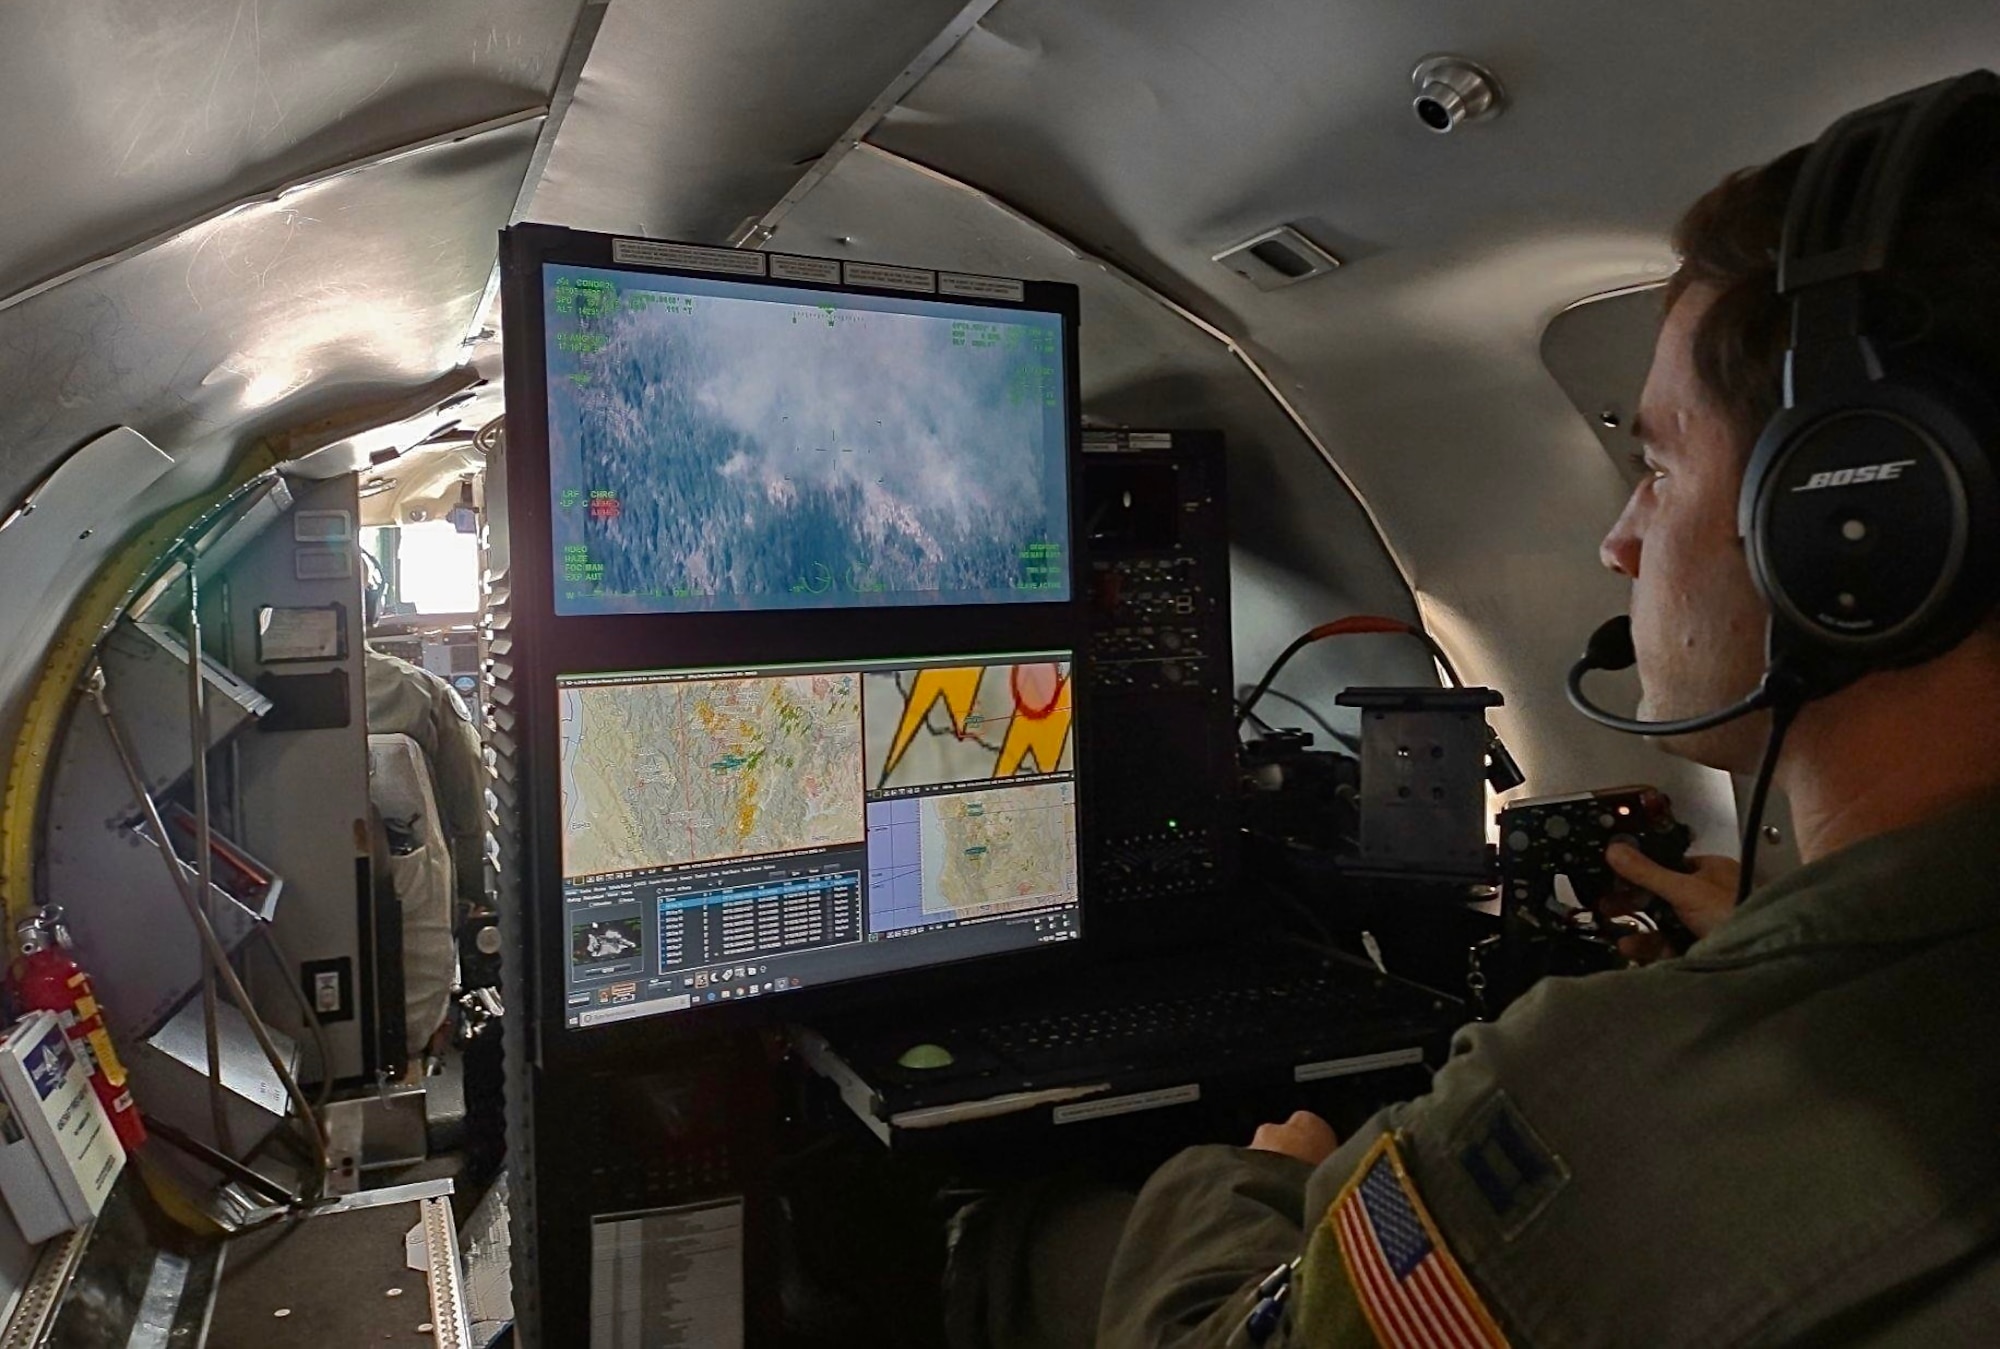 Capt. Alex McArdel, 141st Air Refueling Wing RC-26B aircraft mission systems officer, uses the aircraft's camera to map and detect wildland fires in the north-western region of the United States, August 1, 2021.